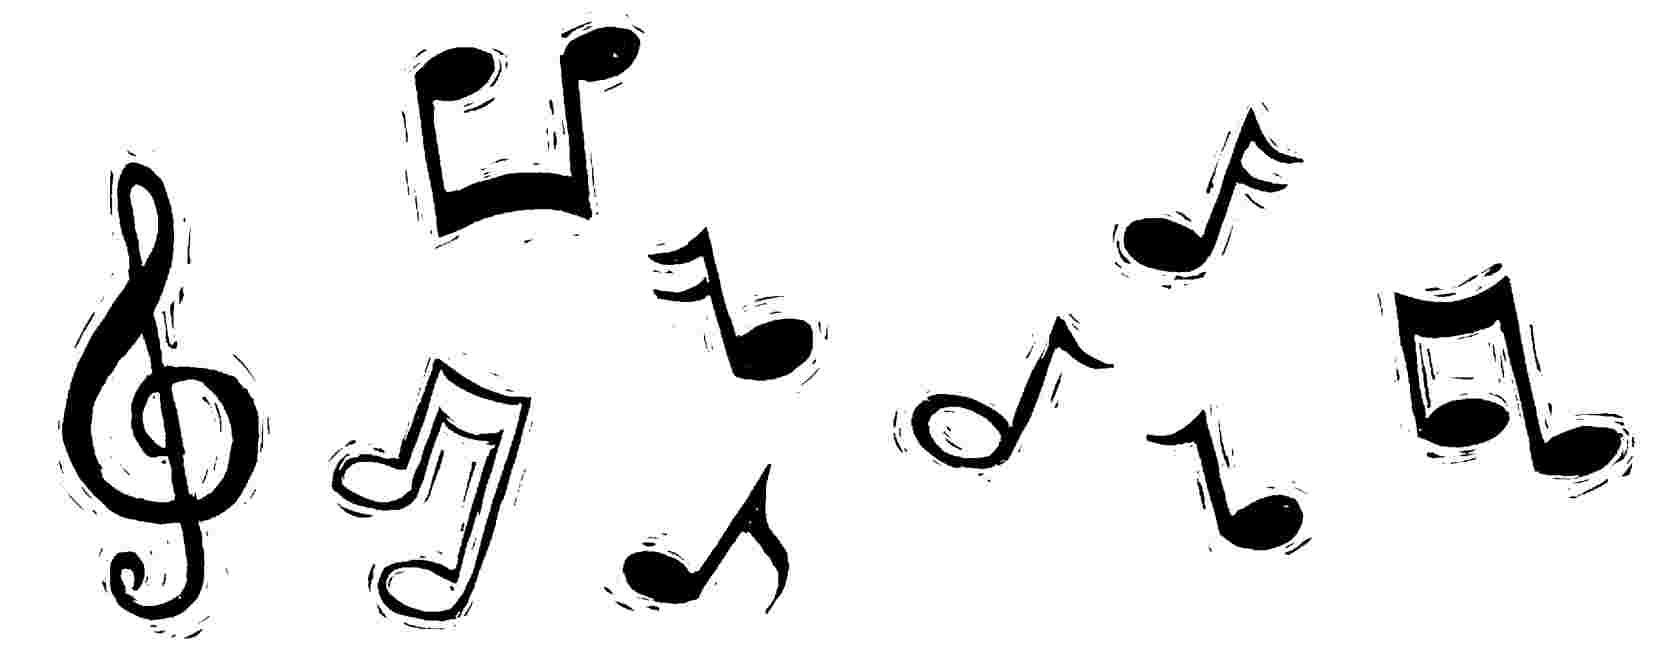 Cool Music Note Symbol Hd Pictures 4 HD Wallpapers | lzamgs.